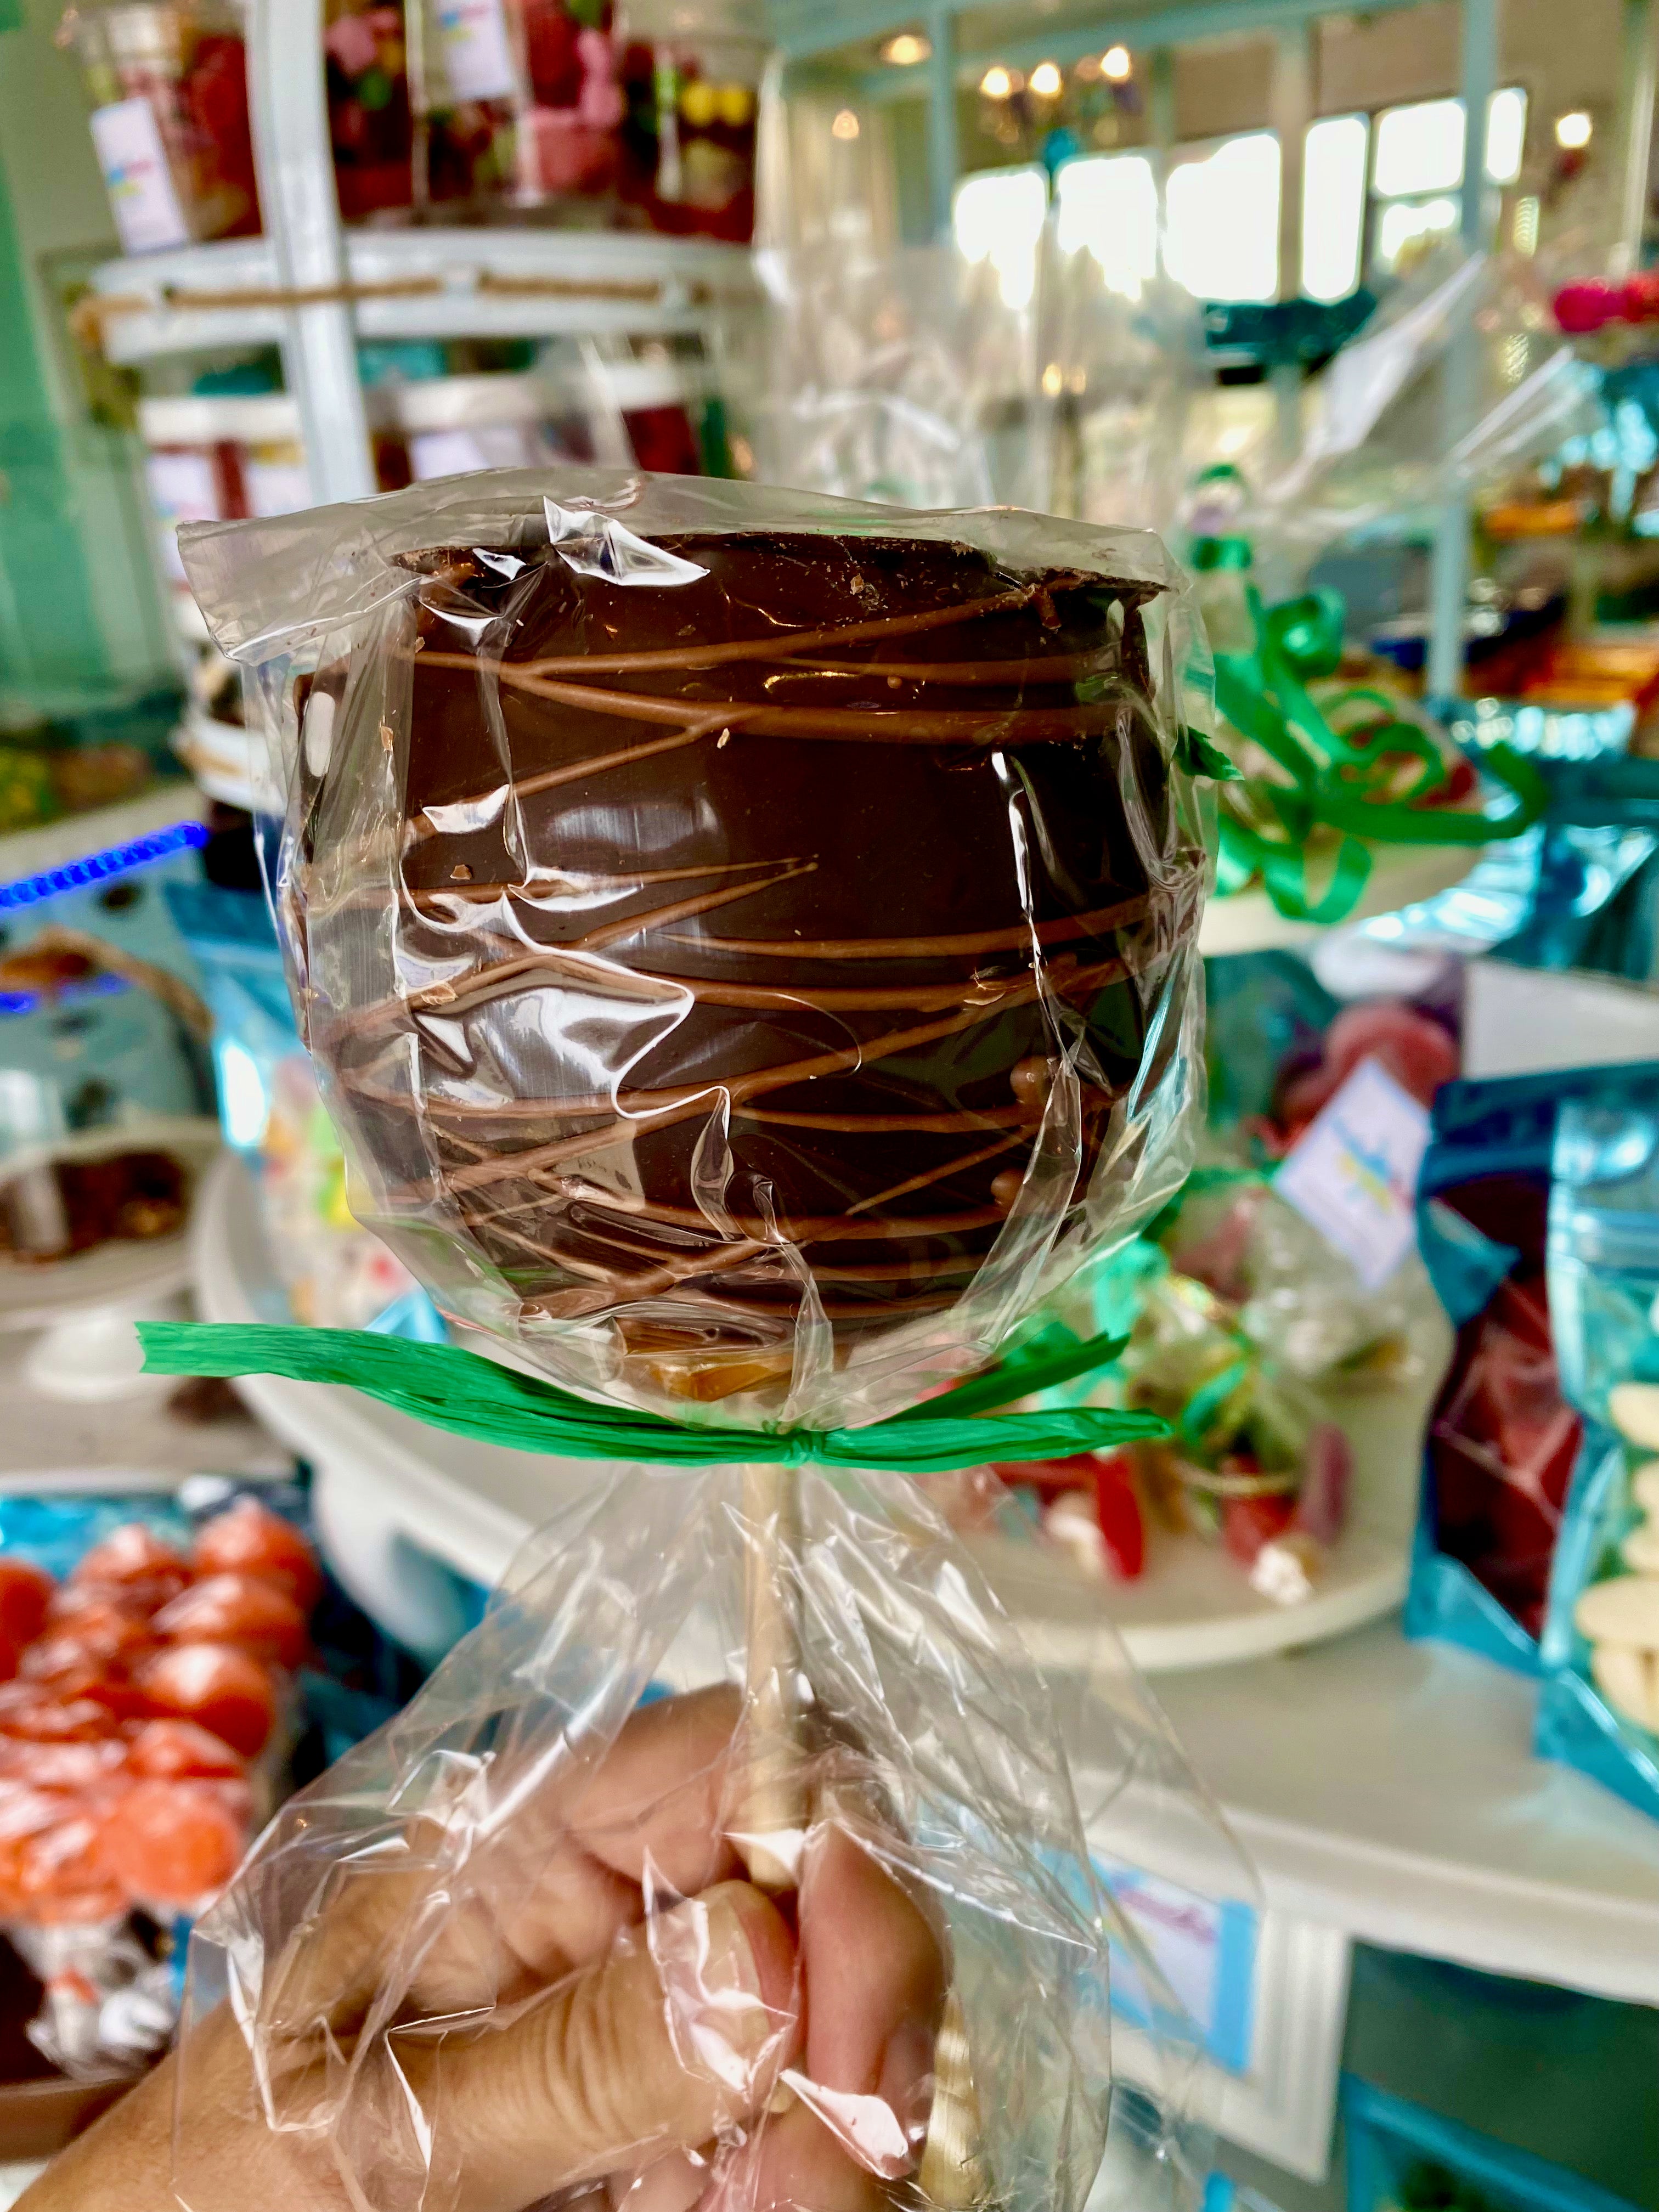 Chocolate covered caramel Apples has arrived